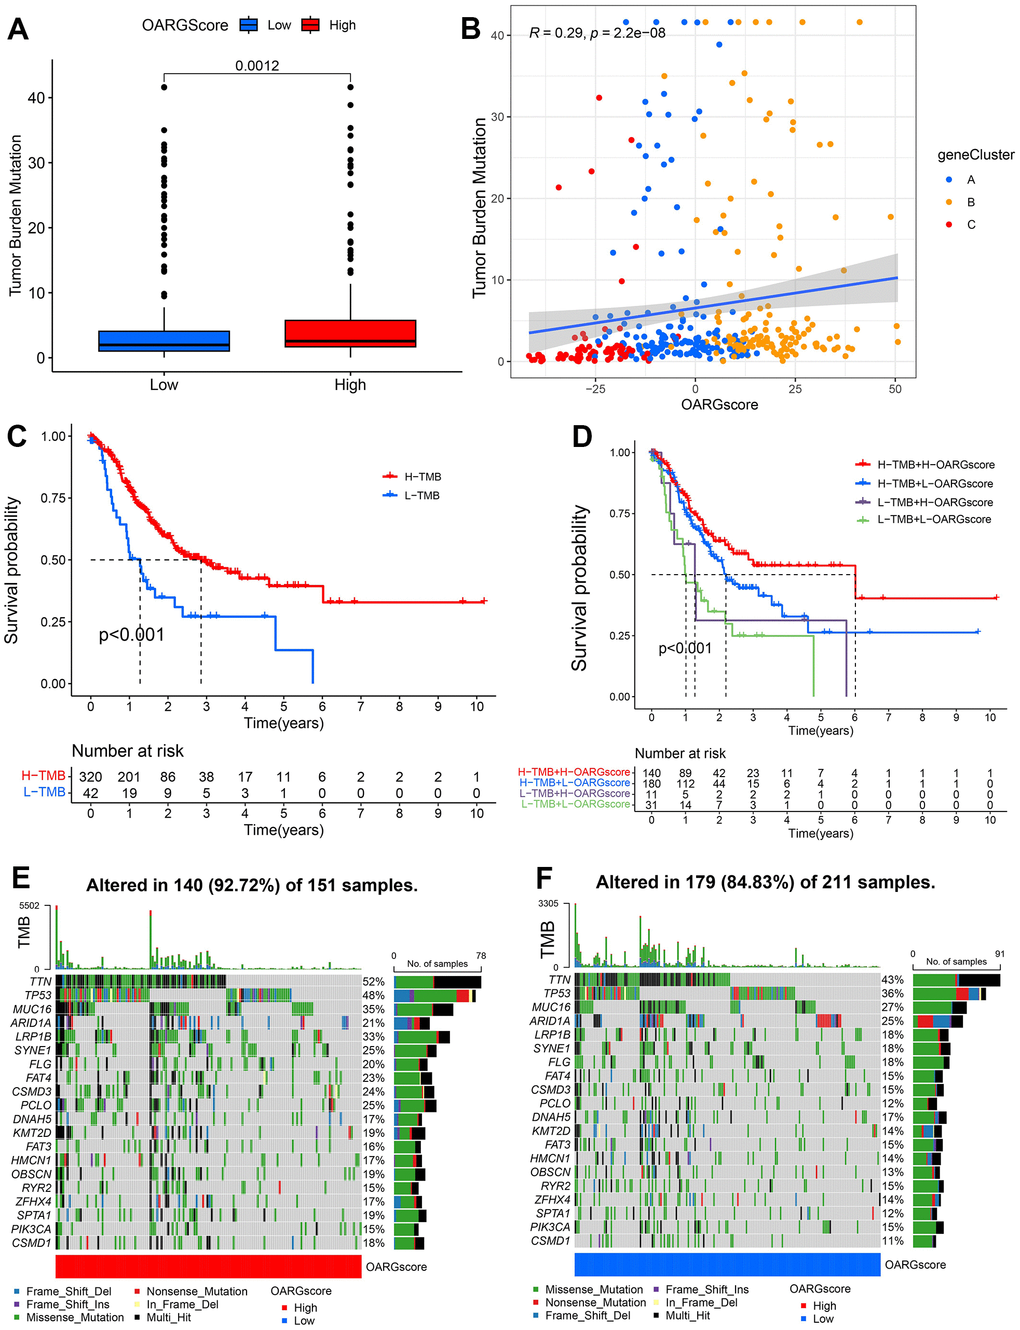 Characteristics of OARG modification in cancer somatic mutation. (A) The differences in the TMB between low- and high-OARGscore groups. (B) The relationship between the TMB and OARGscore. (C) Survival analysis utilizing KM curves for low- and high-TMB groups. (D) KM curves for patients stratified by both TMB and OARGscore. (E, F) Waterfall plot of cancer somatic mutations constructed from patients with (E) high-OARGscore and (F) low-OARGscore.